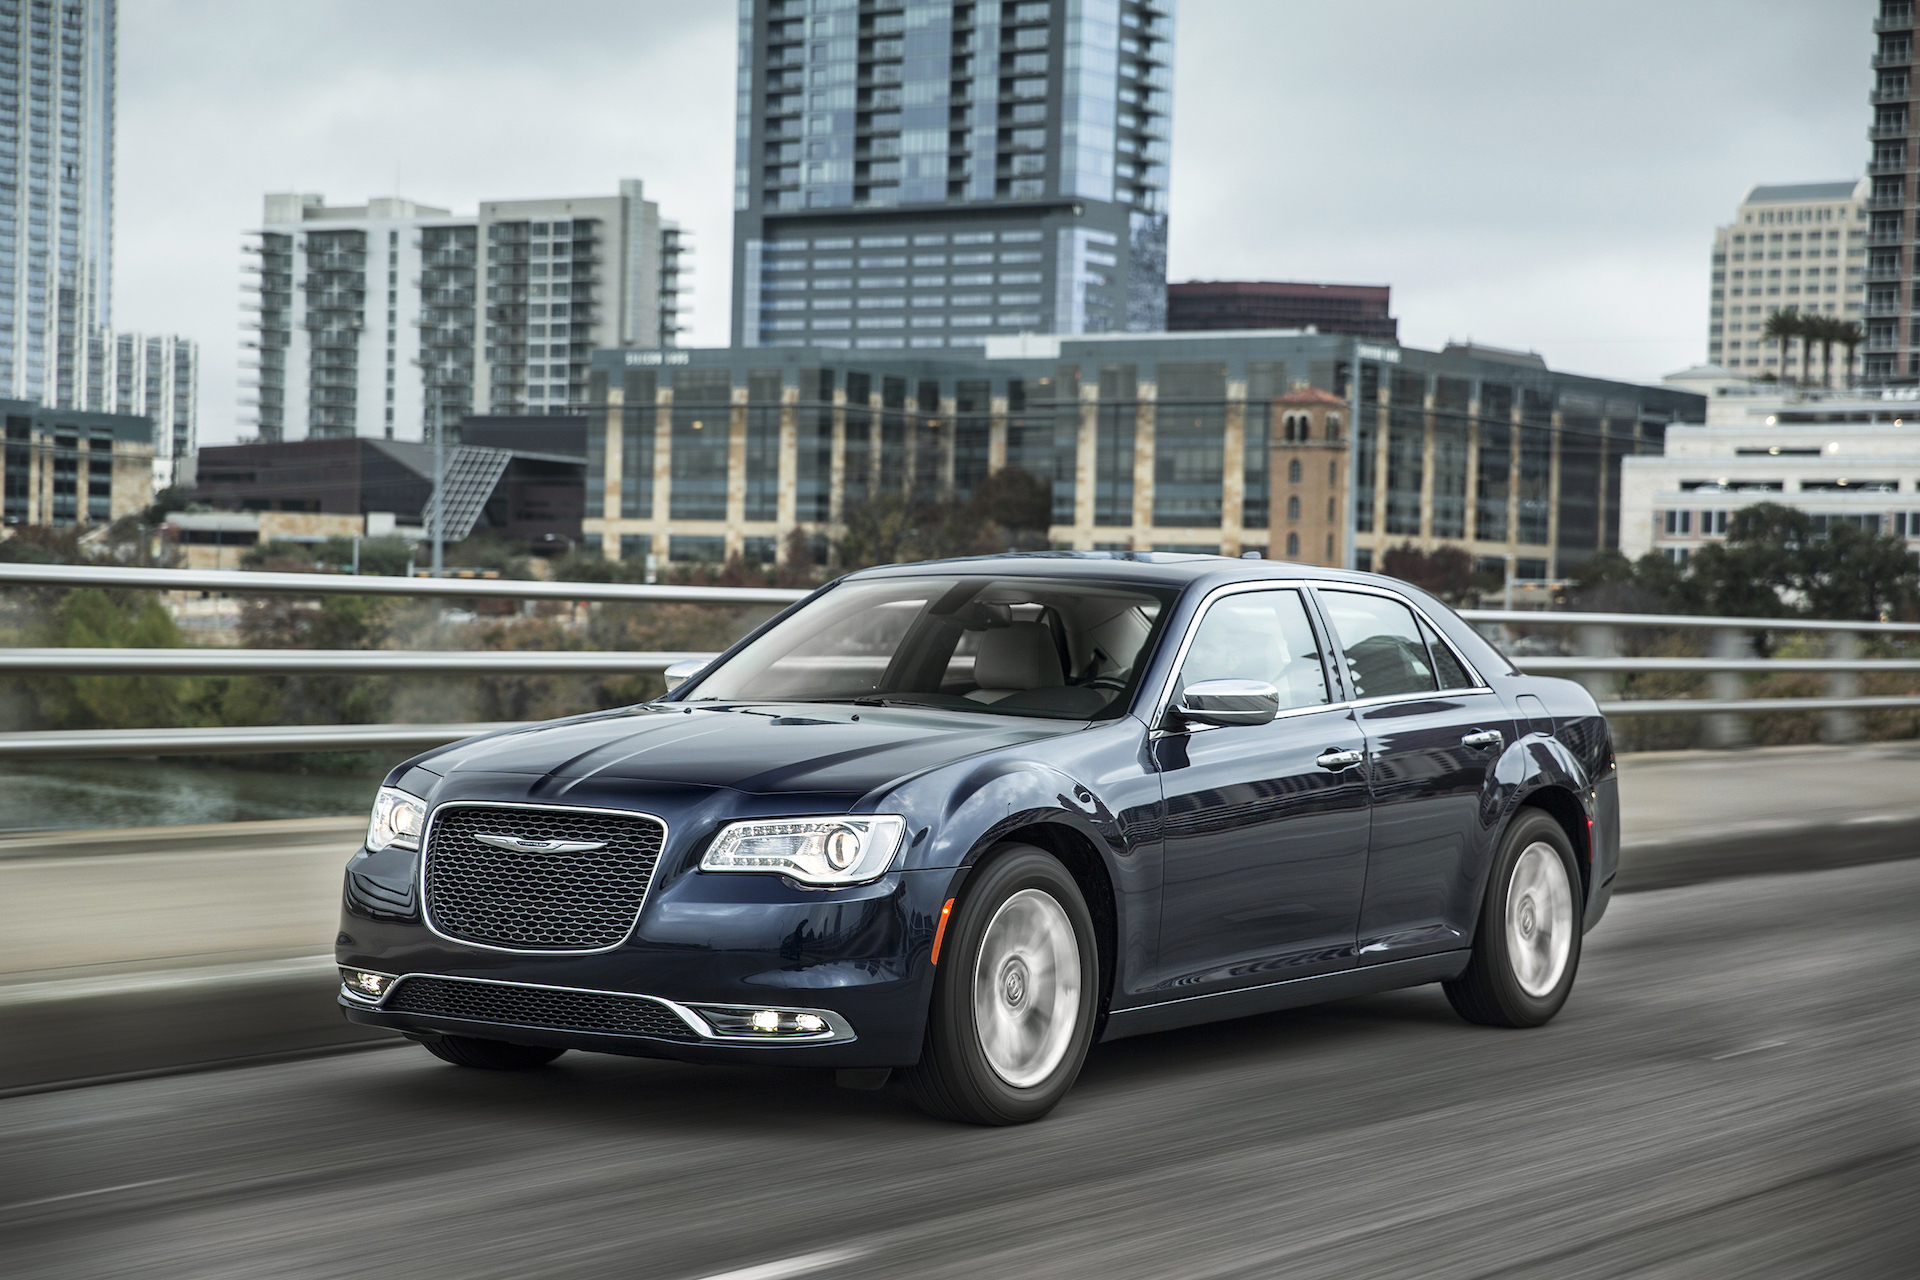 2017 Chrysler 300 Review, Ratings, Specs, Prices, and Photos - The Car Connection